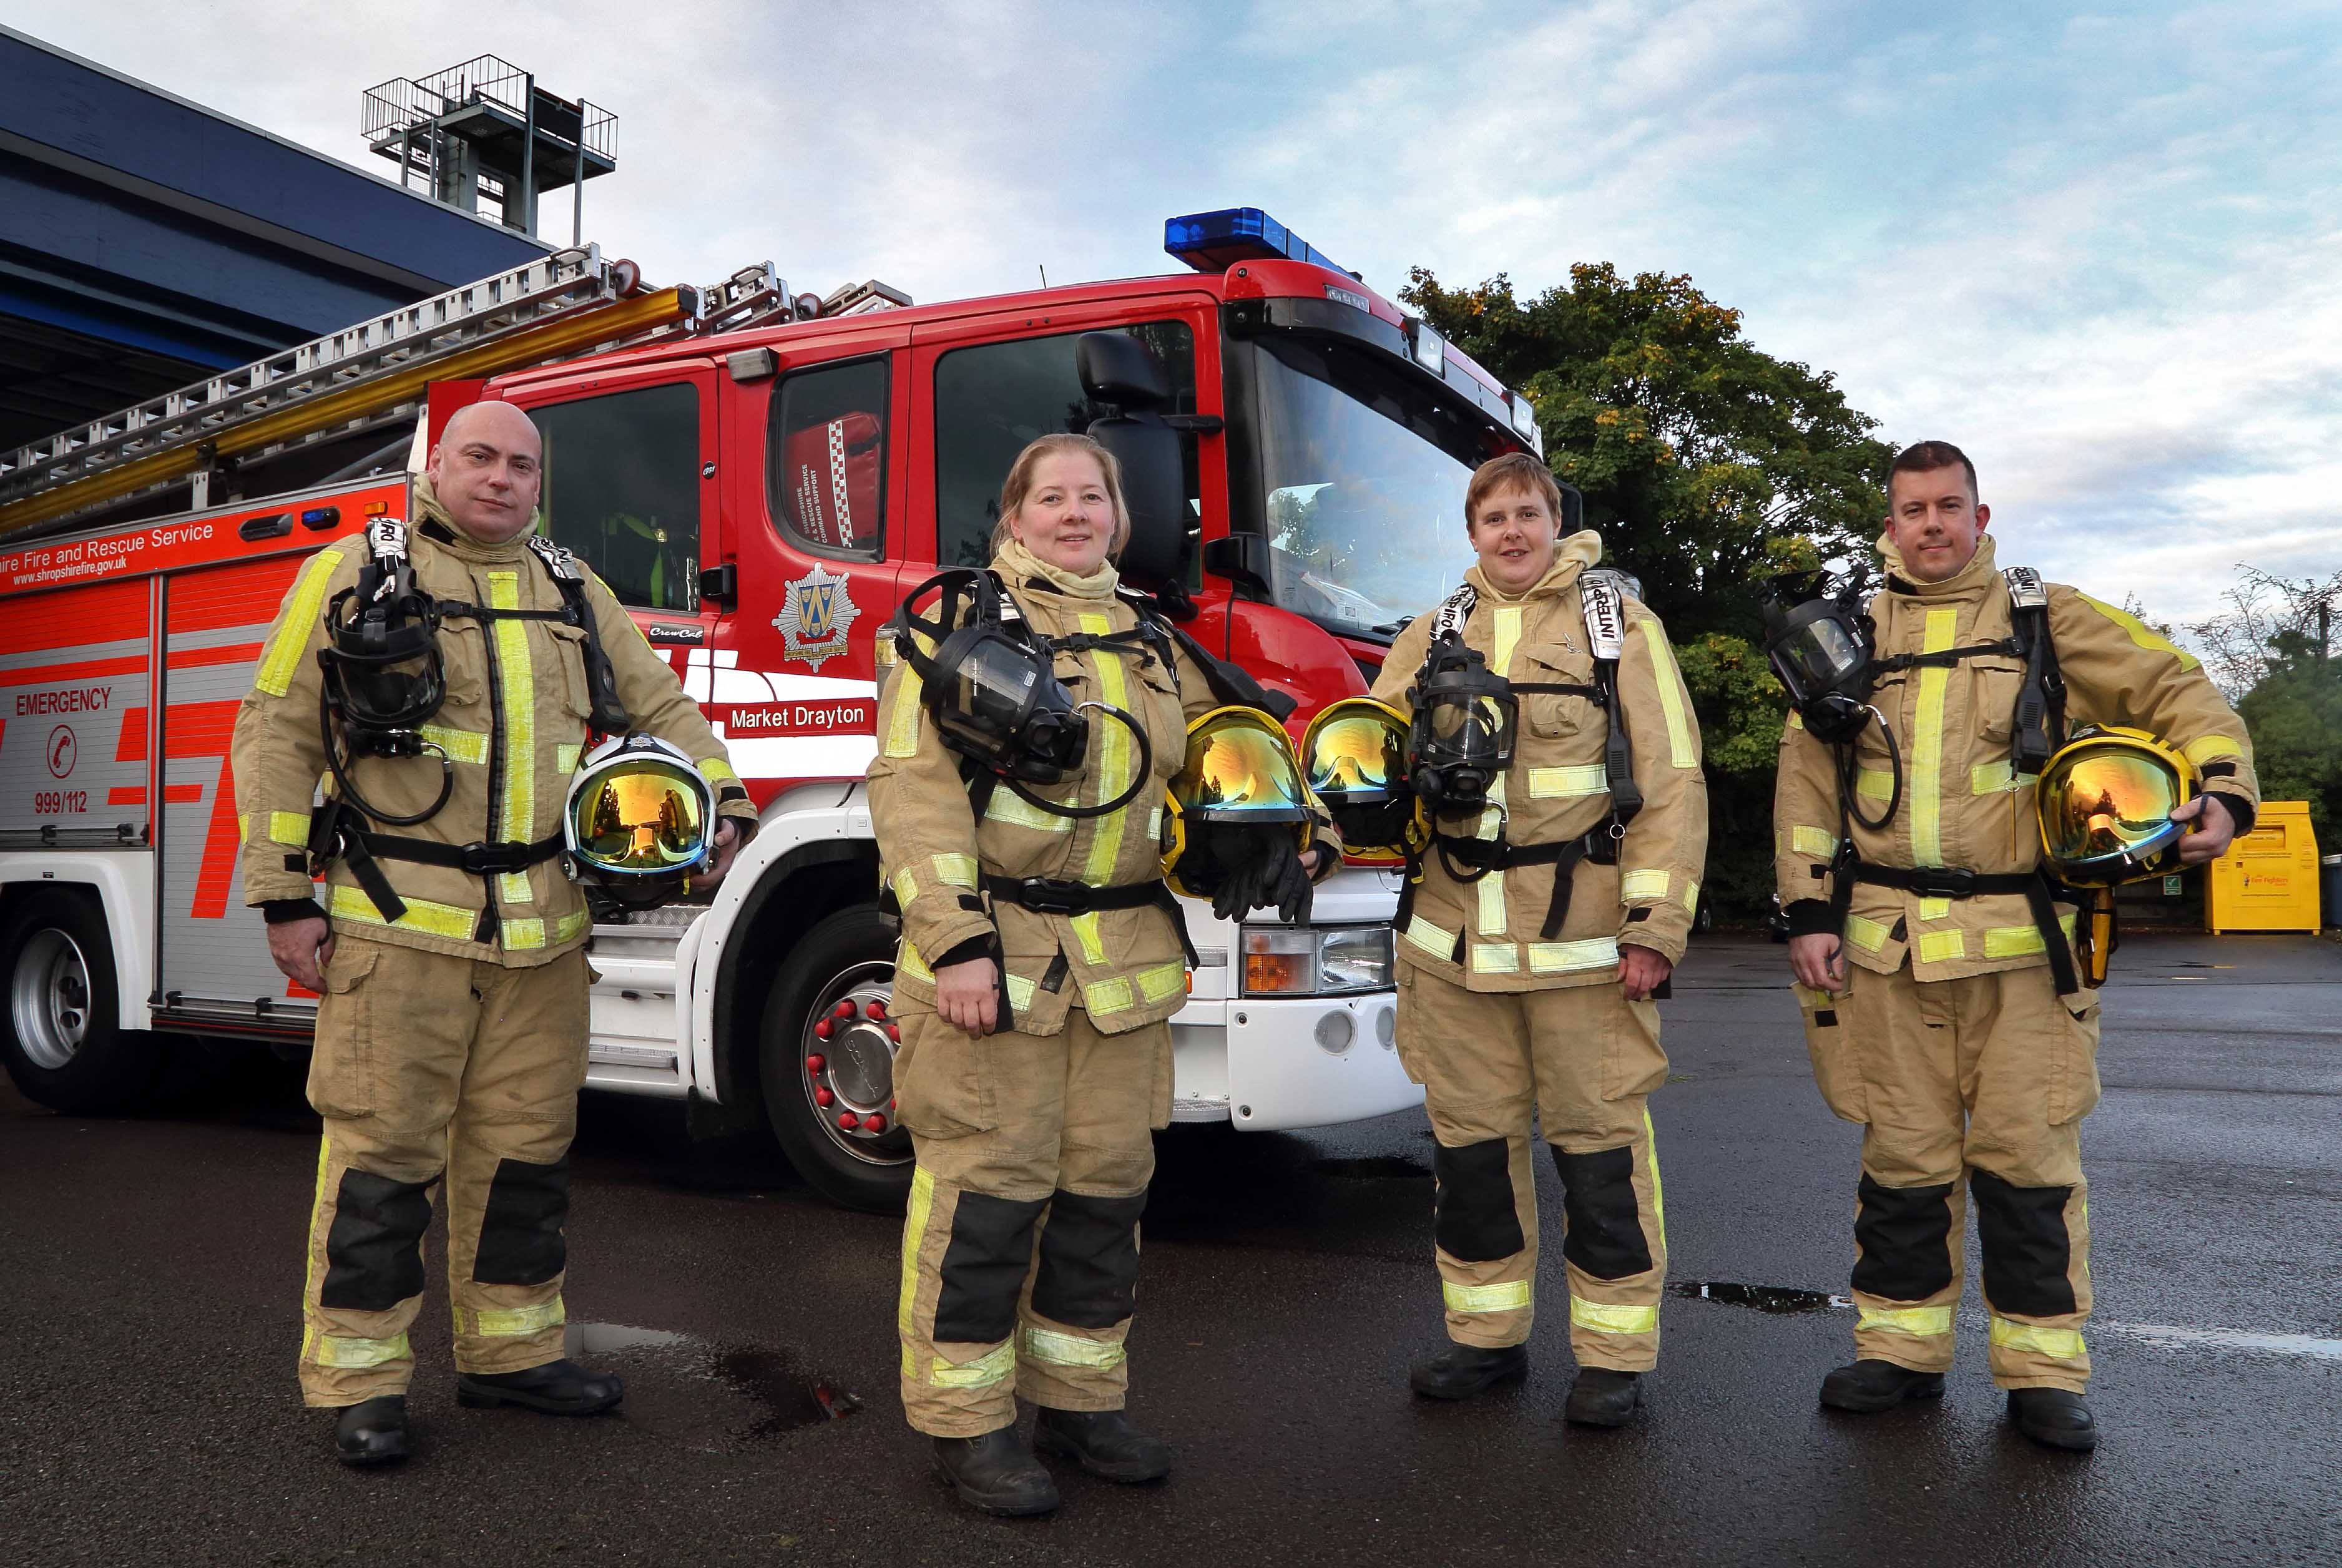 The same line up but without breathing apparatus: Market Drayton Fire Station’s Watch Manager Mark Smith with firefighters Sarah Cartwright, Sally Eynon, who is working towards becoming a crew manager, and firefighter Leon Turner.